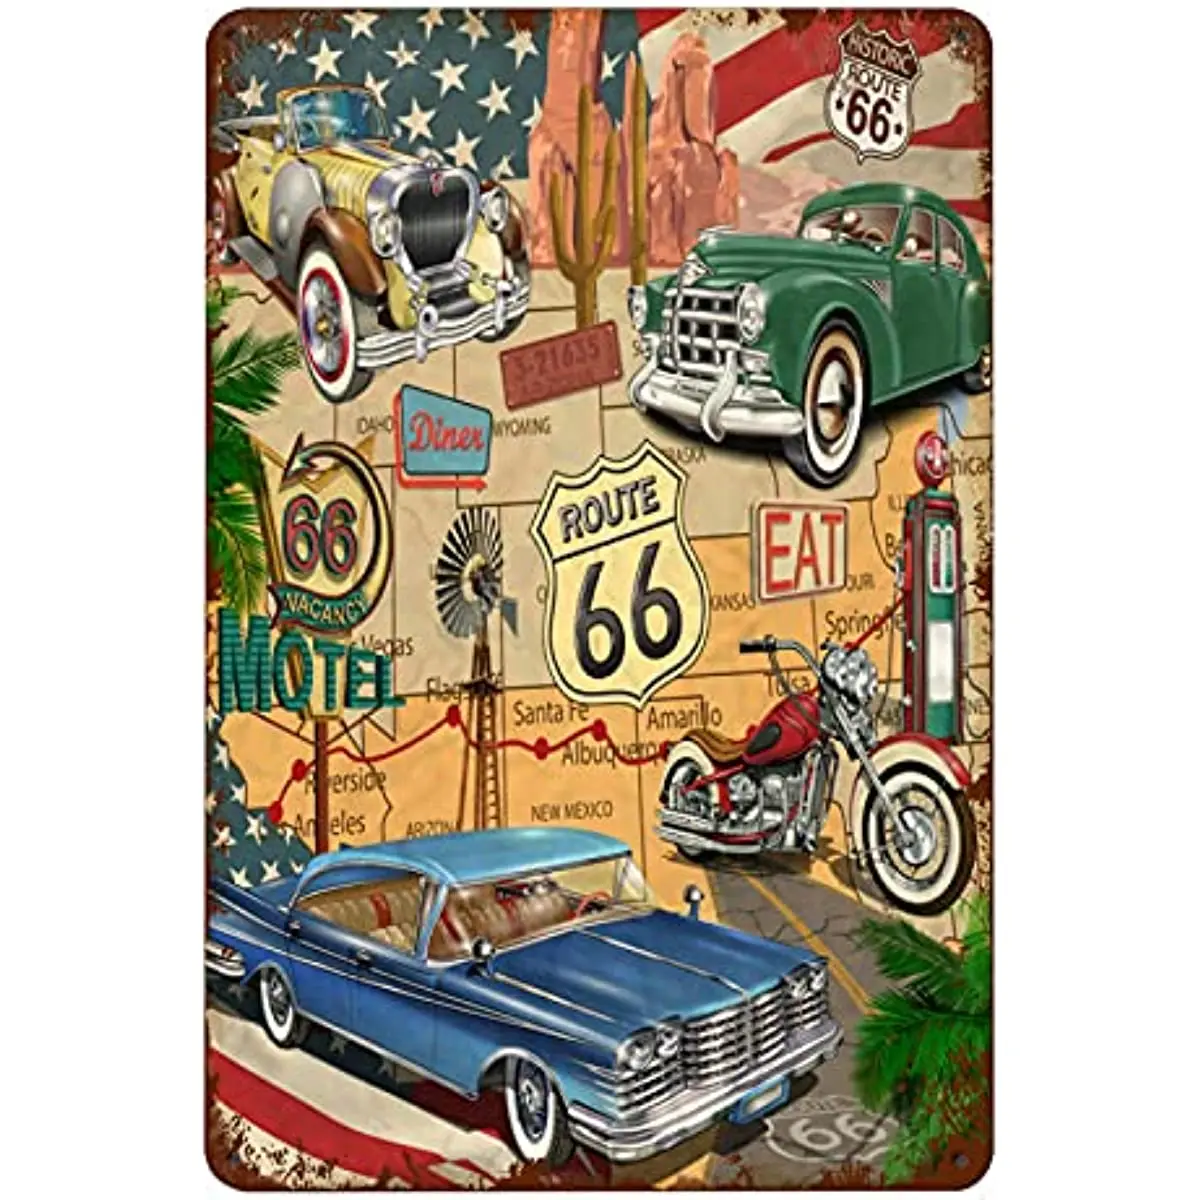 

Route 66 Metal Signs Vintage High Way Diner Wall Decor for Home Kitchen Bar Patio Room Garage Retro Tin Poster Plaque